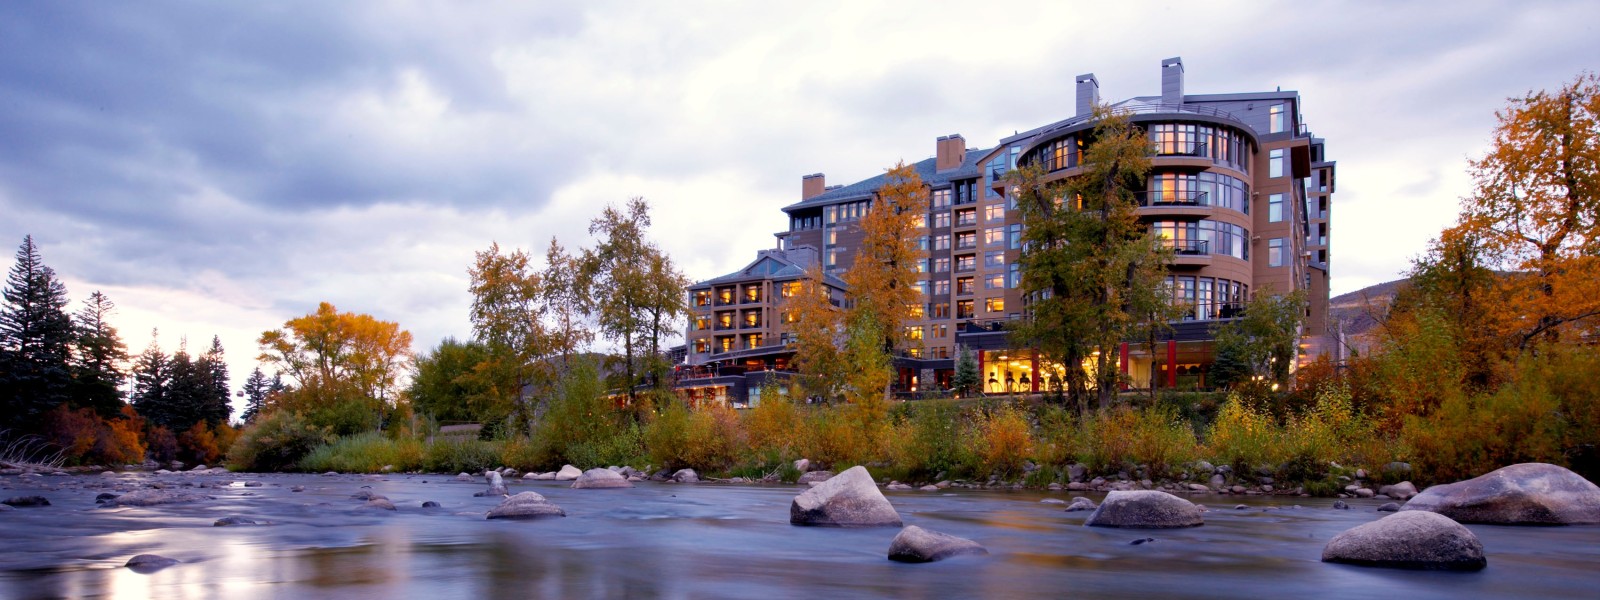 15 Works of Oz Architecture Every Architect should visit - The Westin Riverfront Resort & Spa at Beaver Creek Mountain